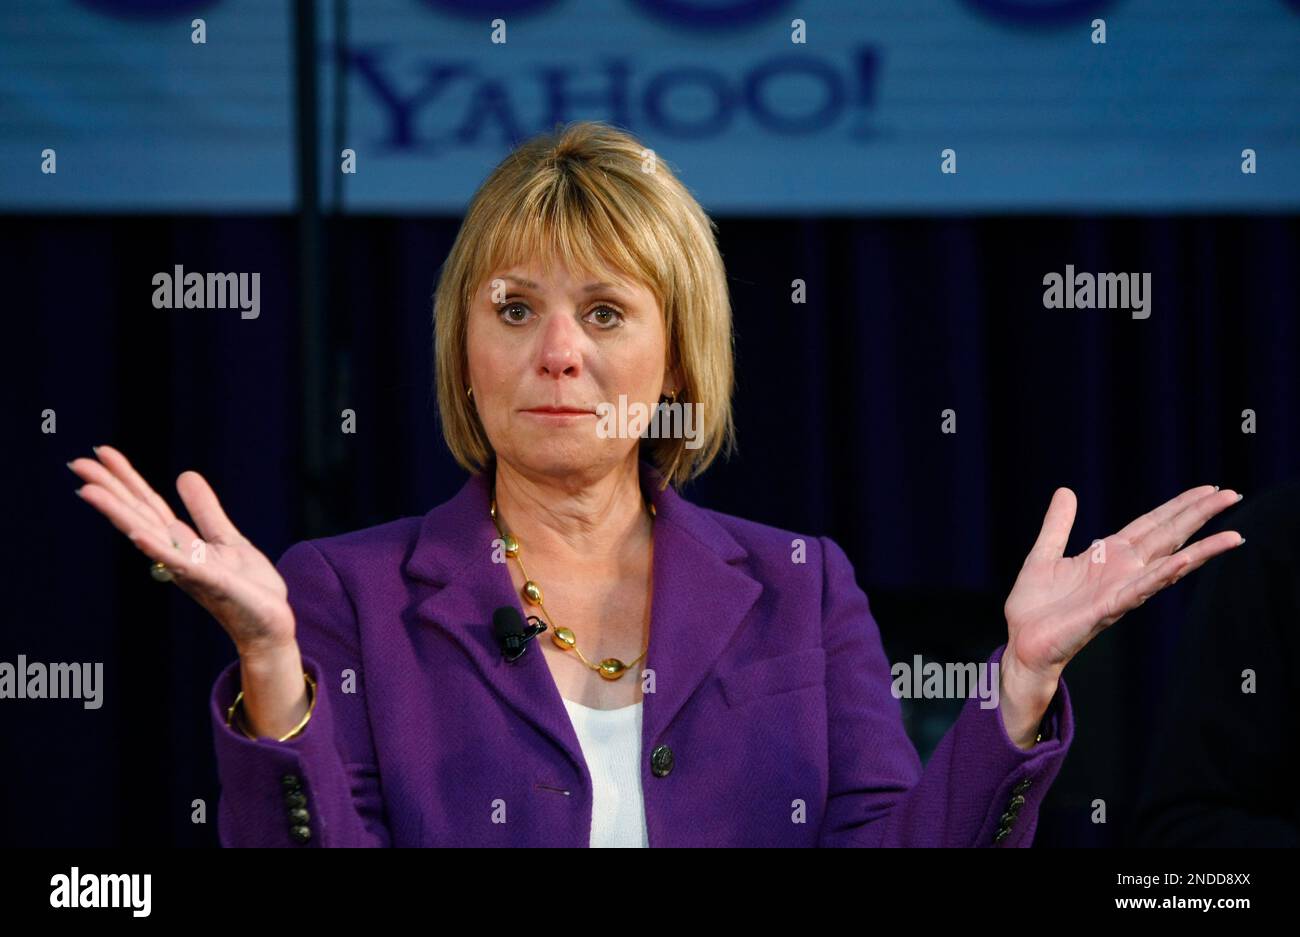 FILE - In this March 2, 2010 file photo, Yahoo CEO Carol Bartz gestures at Yahoo headquarters in Sunnyvale, Calif. Yahoo Inc.'s turnaround effort wavered in the second quarter as the Internet company's lackluster revenue growth overshadowed a surge in net income. The results released Tuesday July 20, 2010, could cause some investors to doubt the strategy of Yahoo's no-nonsense CEO, Carol Bartz, who was hired 18 months ago to lead the company out of a prolonged financial funk that has depressed its stock. (AP Photo/Paul Sakuma, file) Stock Photo